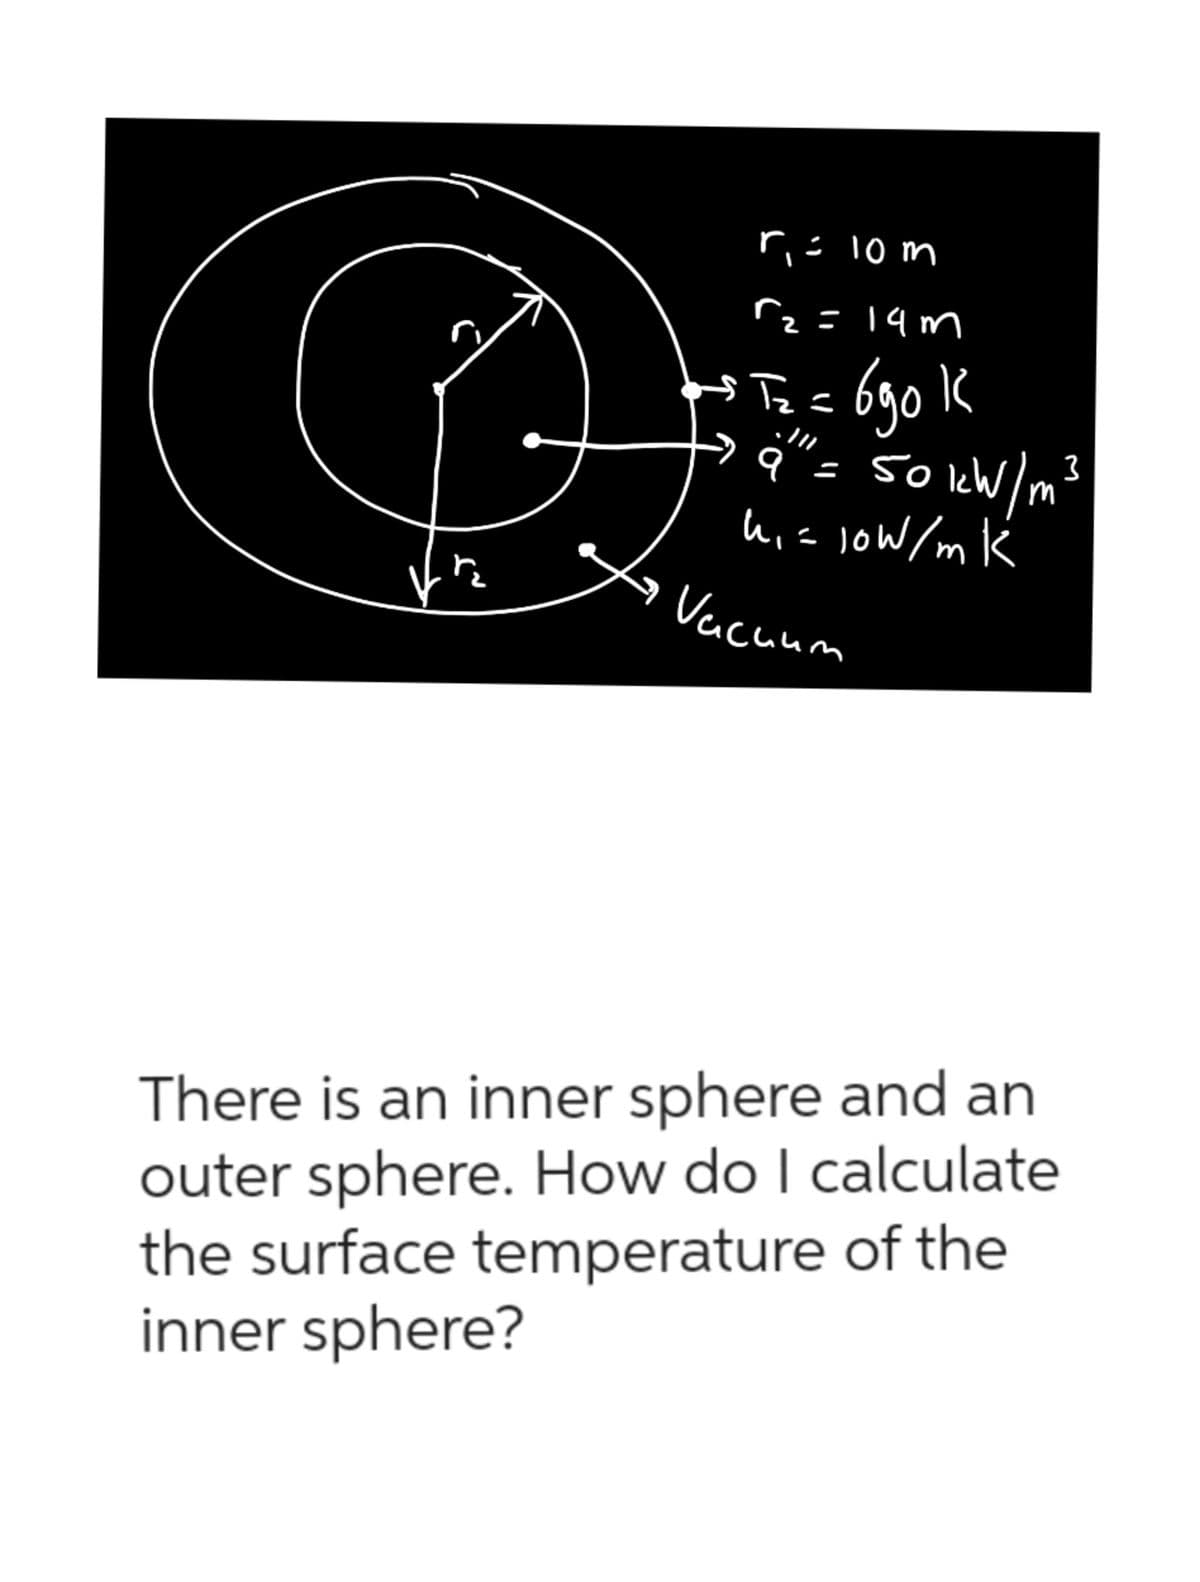 B
ņ
r₁ = 10 m
r₂ =14m
2
$Tz=
к
3
ITZ= 690 1
' 9" = 50 kW/m²³
h₁ = 10W/mK
Vacuum
There is an inner sphere and an
outer sphere. How do I calculate
the surface temperature of the
inner sphere?